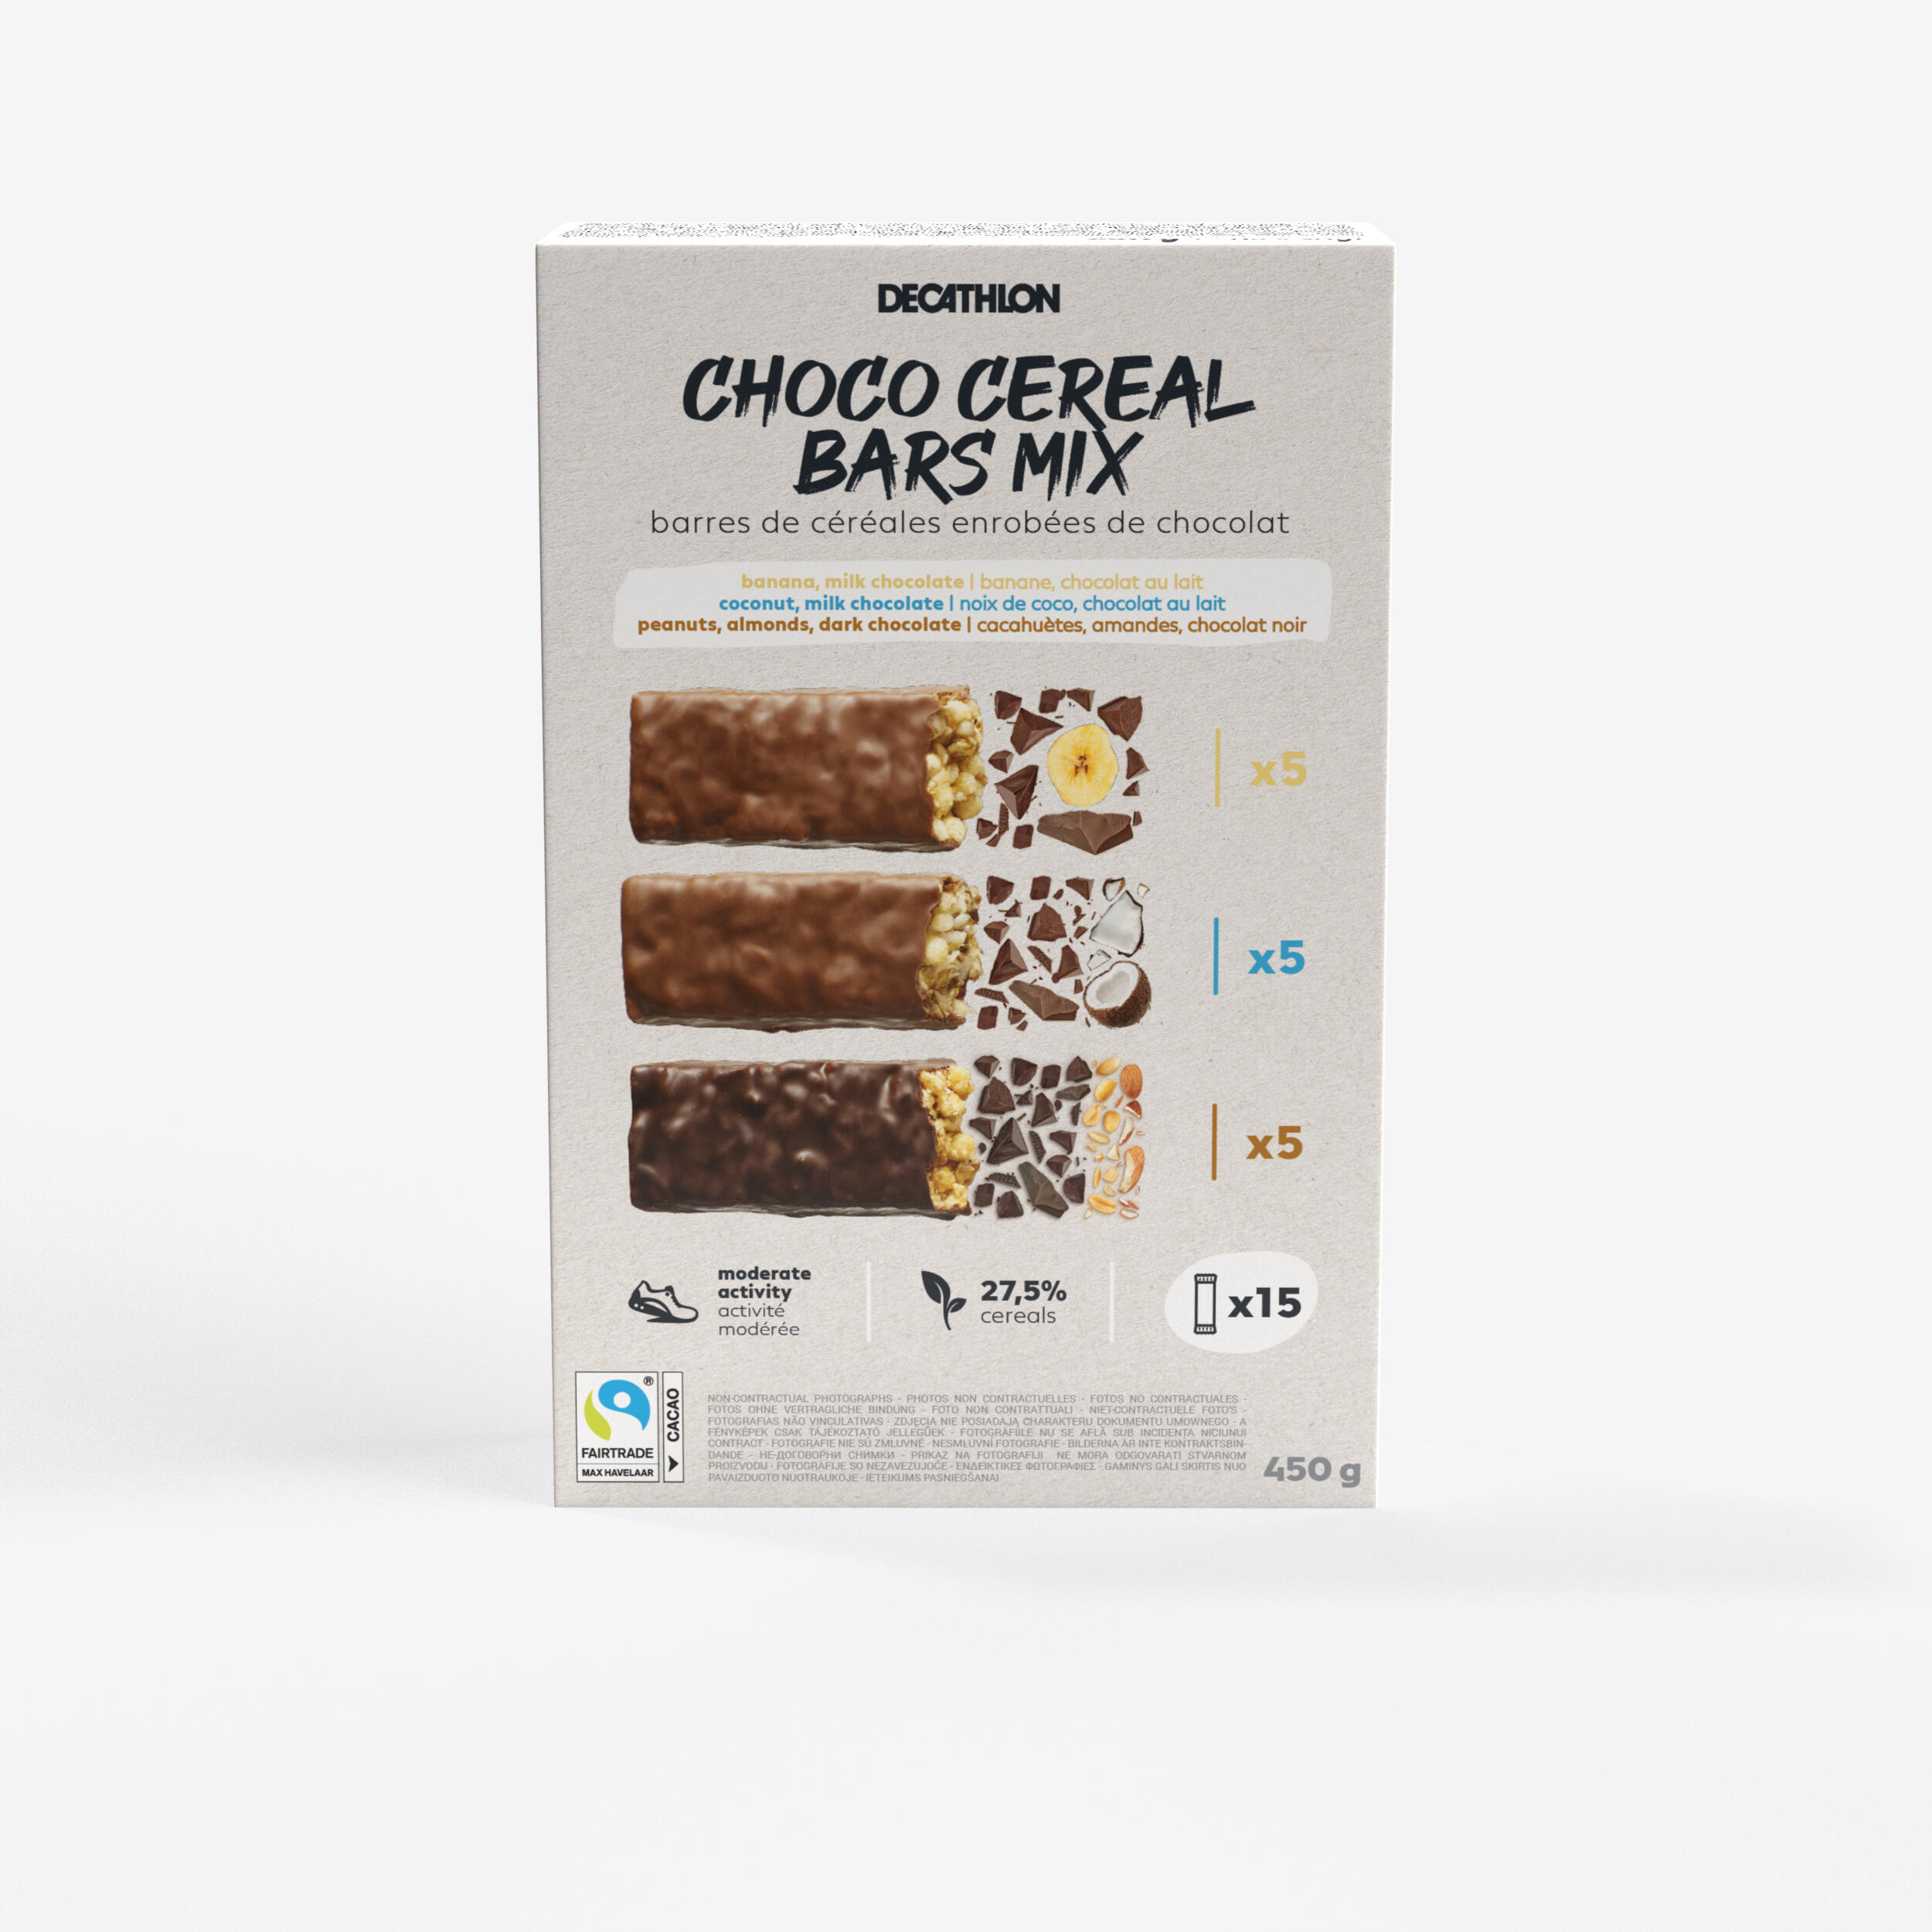 DECATHLON CHOCOLATE-COATED CEREAL MIX BARS x15